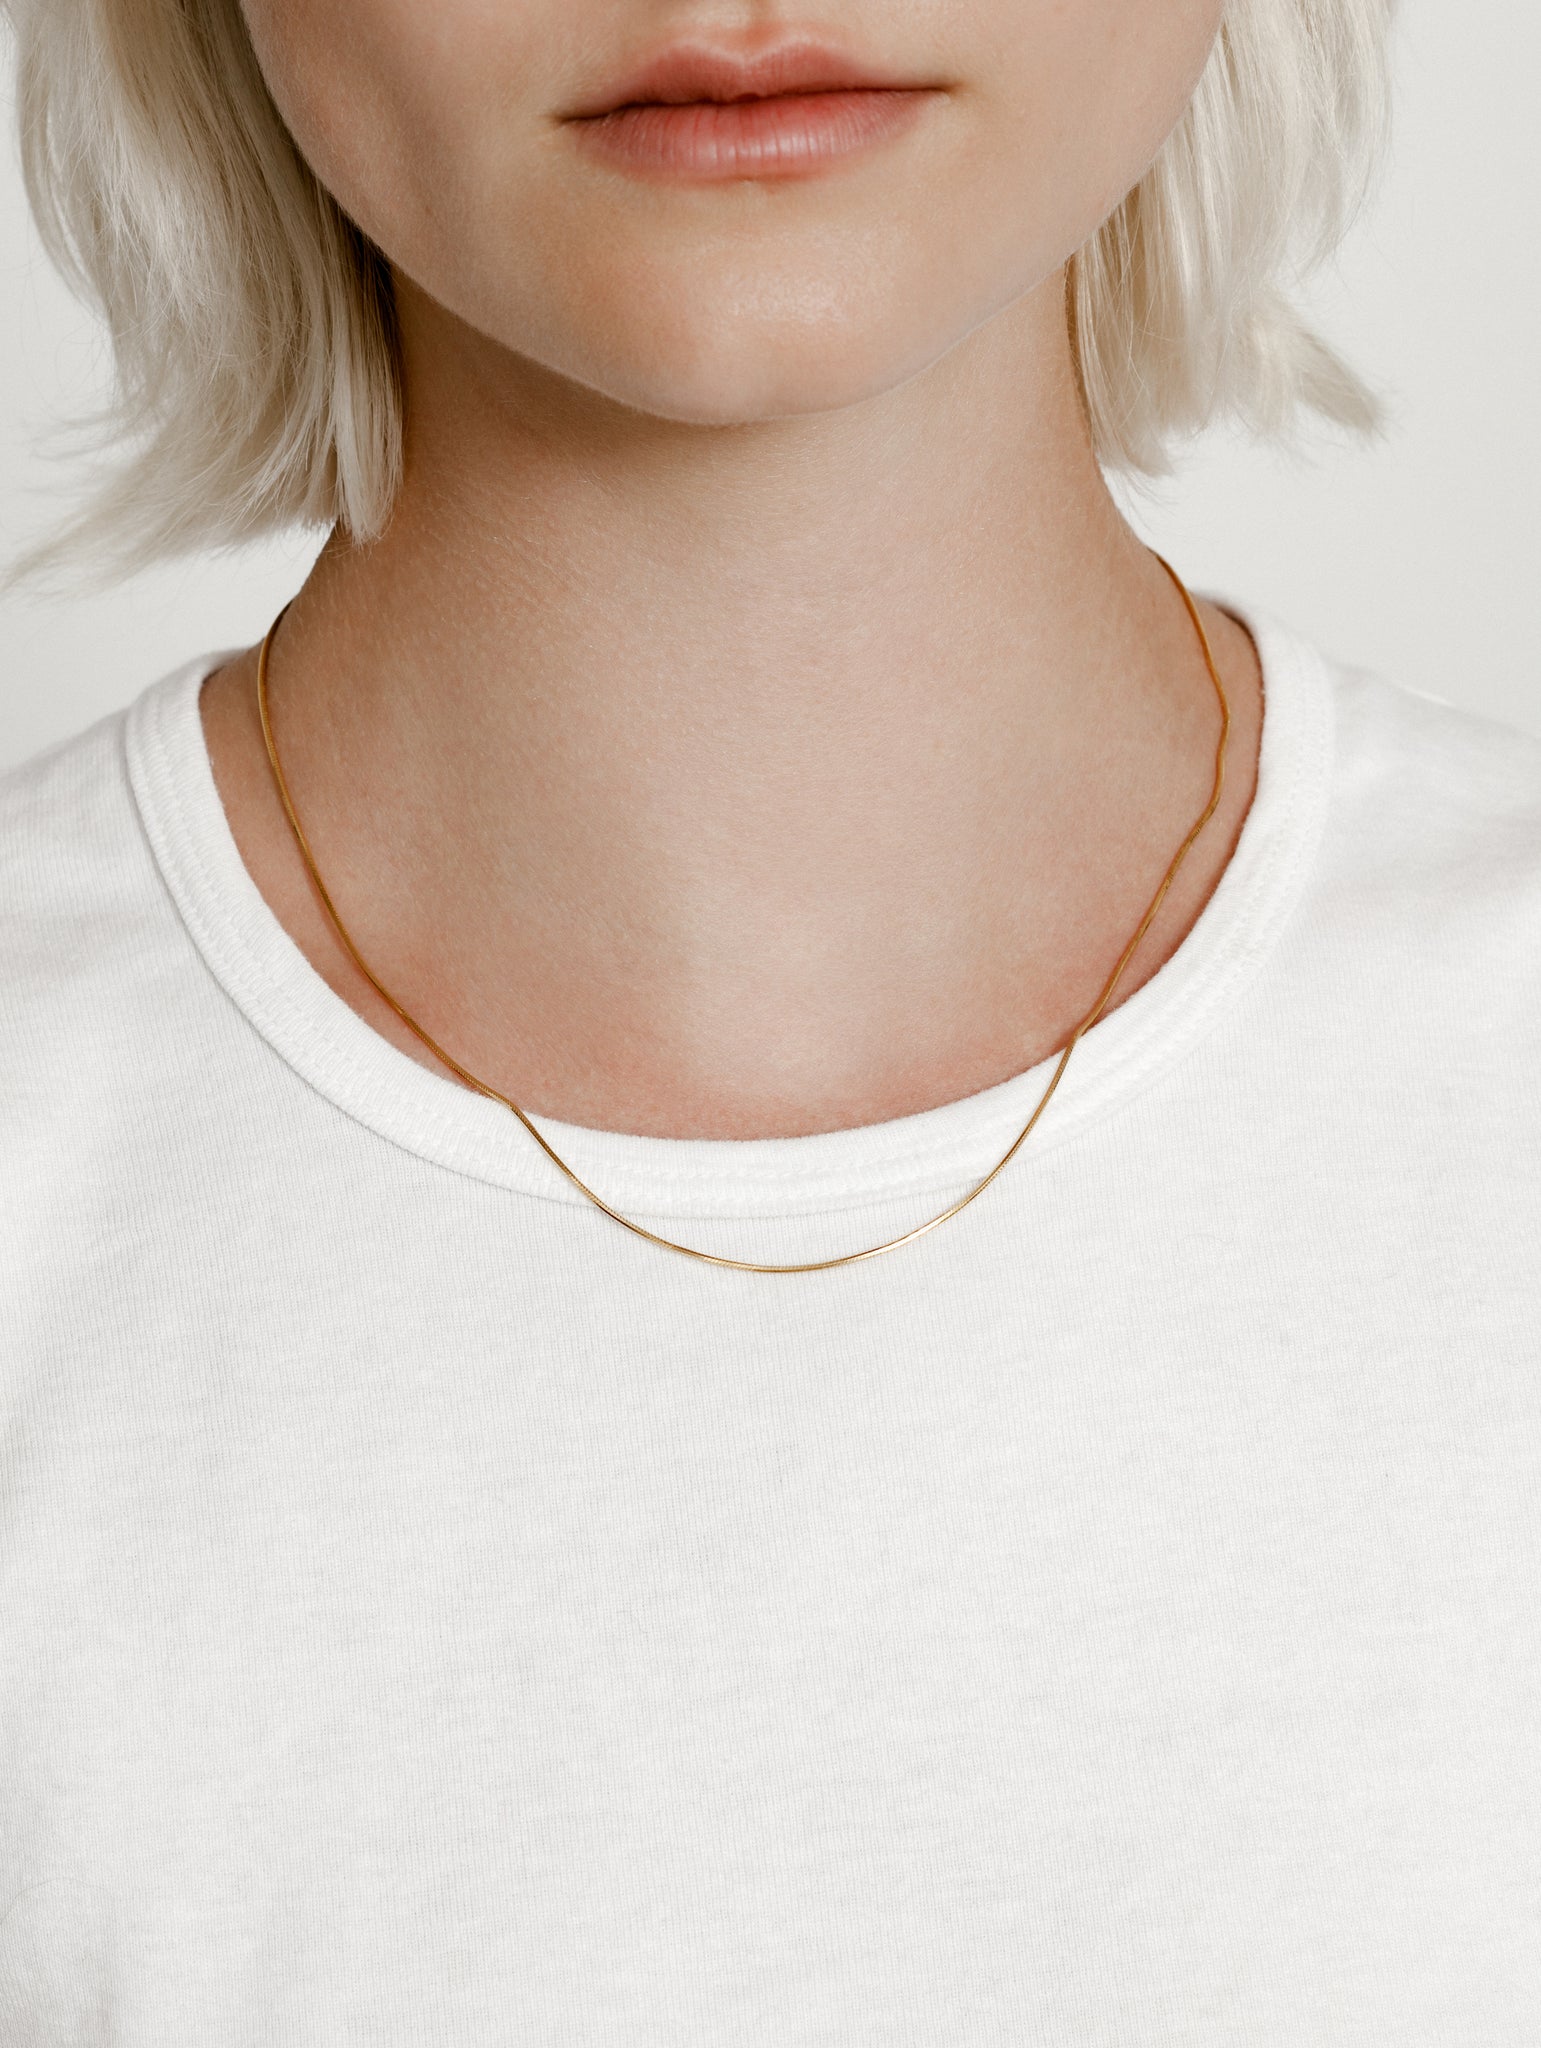 Wolf Circus 14k Gold Snake Chain Necklace | Sylvie Necklace in Gold-Necklaces-wolfcircus.com